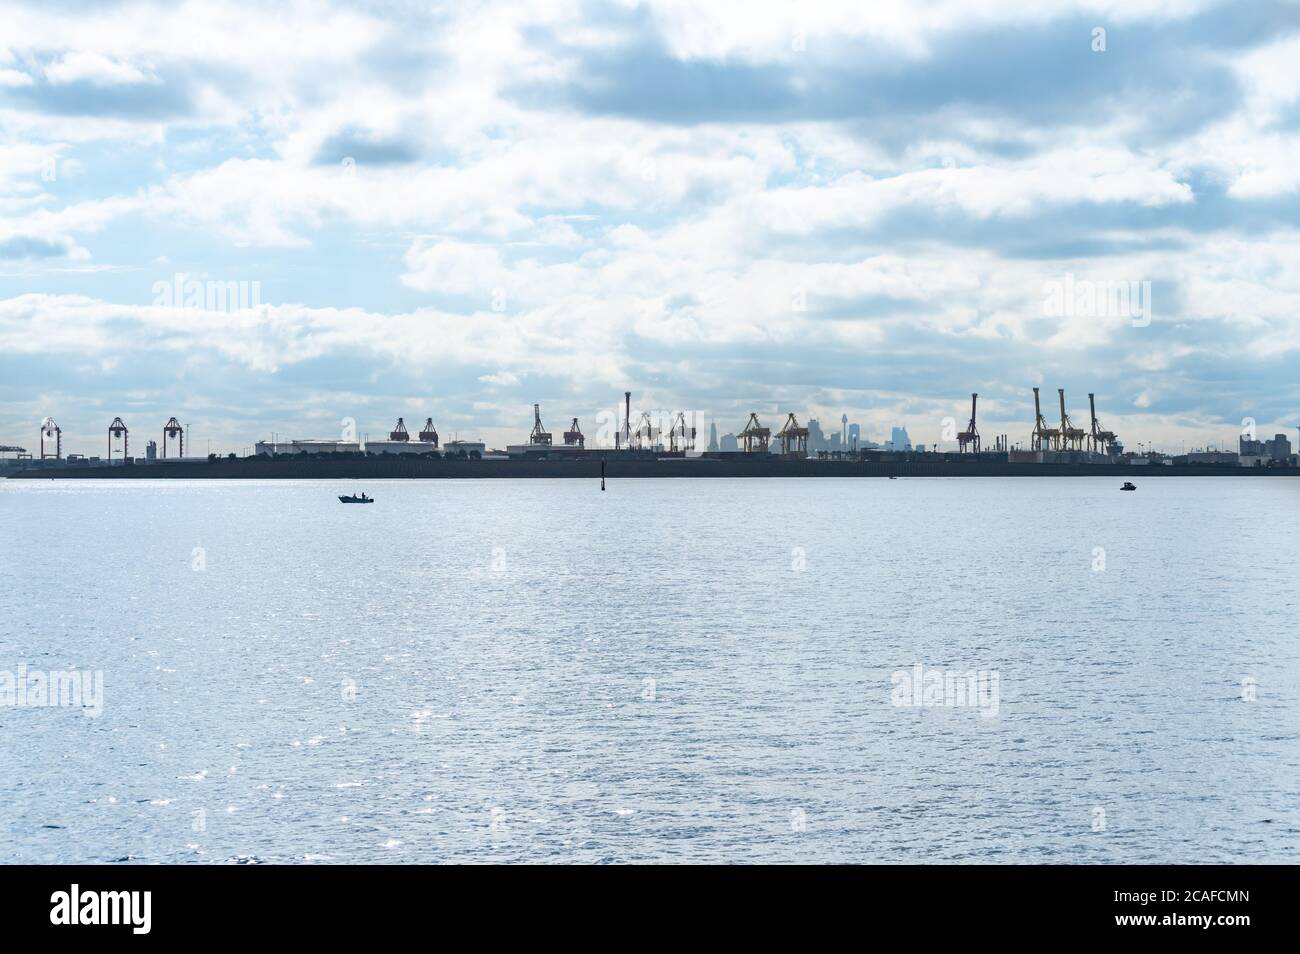 Sydney NSW Australia July 9th 2020 - View of Botany Bay Blue Water and Botany Port Cranes on a sunny winter afternoon Stock Photo